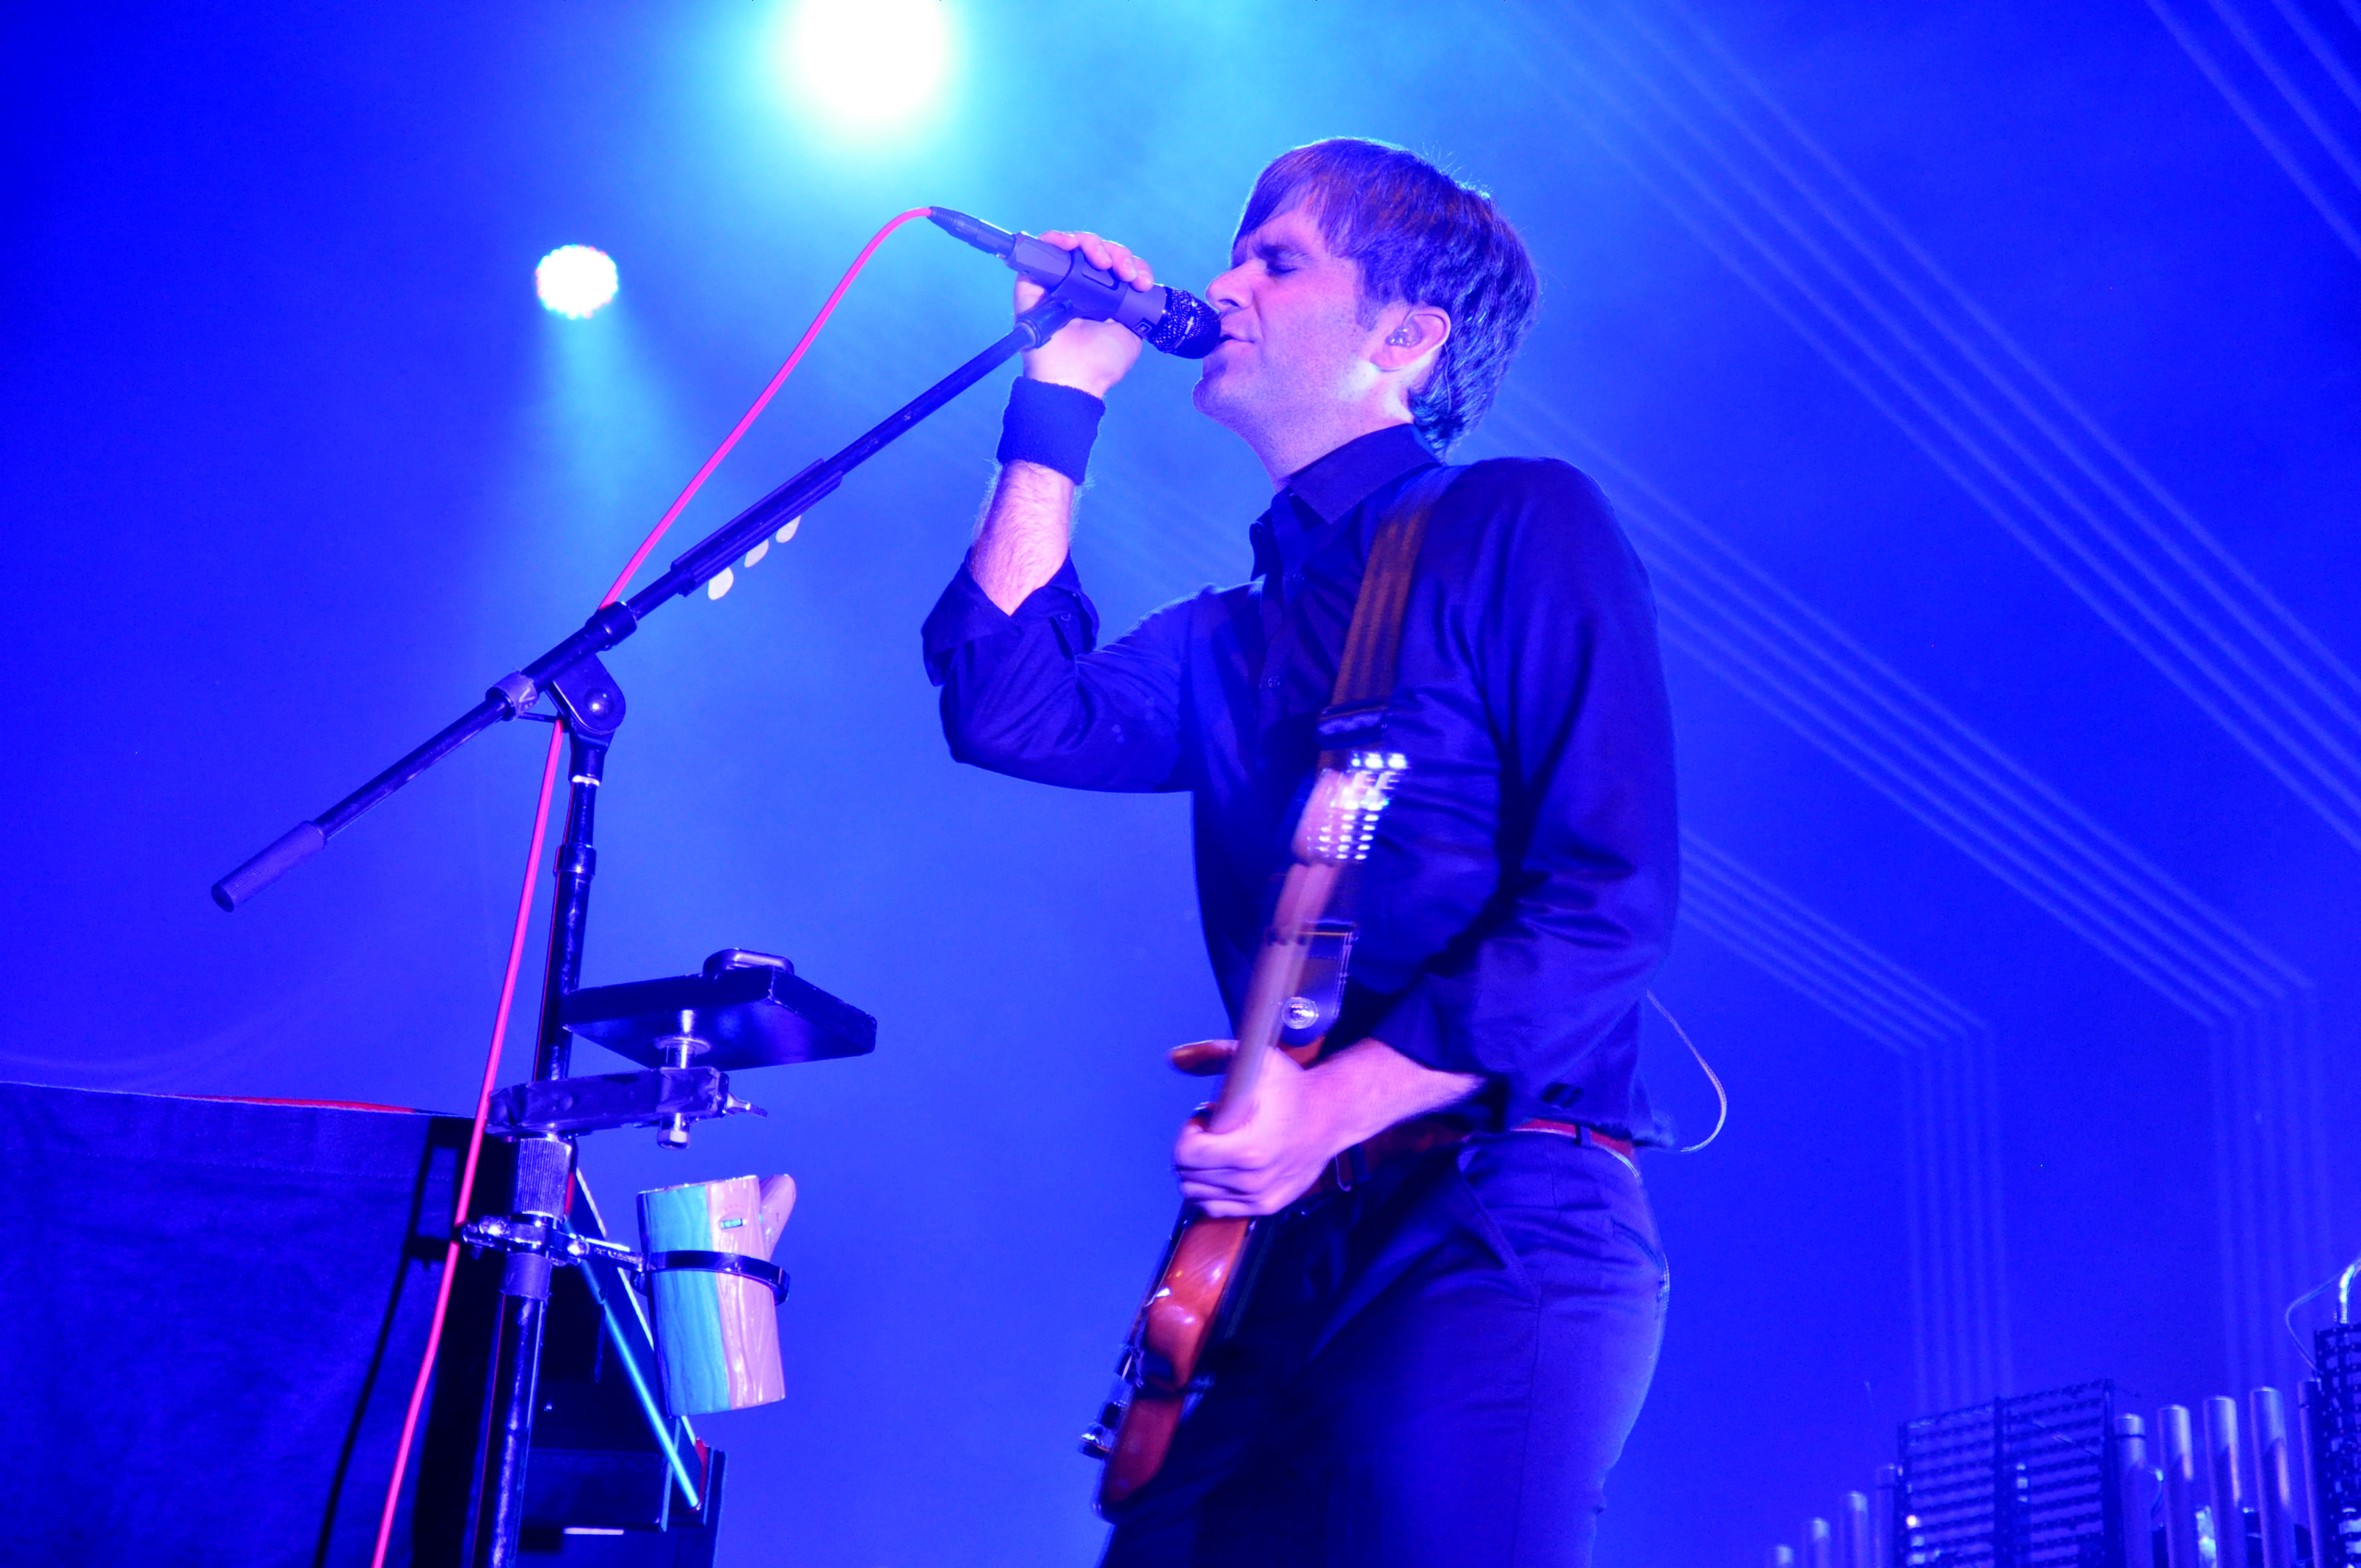 The Vera Project Announces Viva Vera 20 Live Stream Anniversary Celebration with Appearances by Ben Gibbard and Perfume Genius